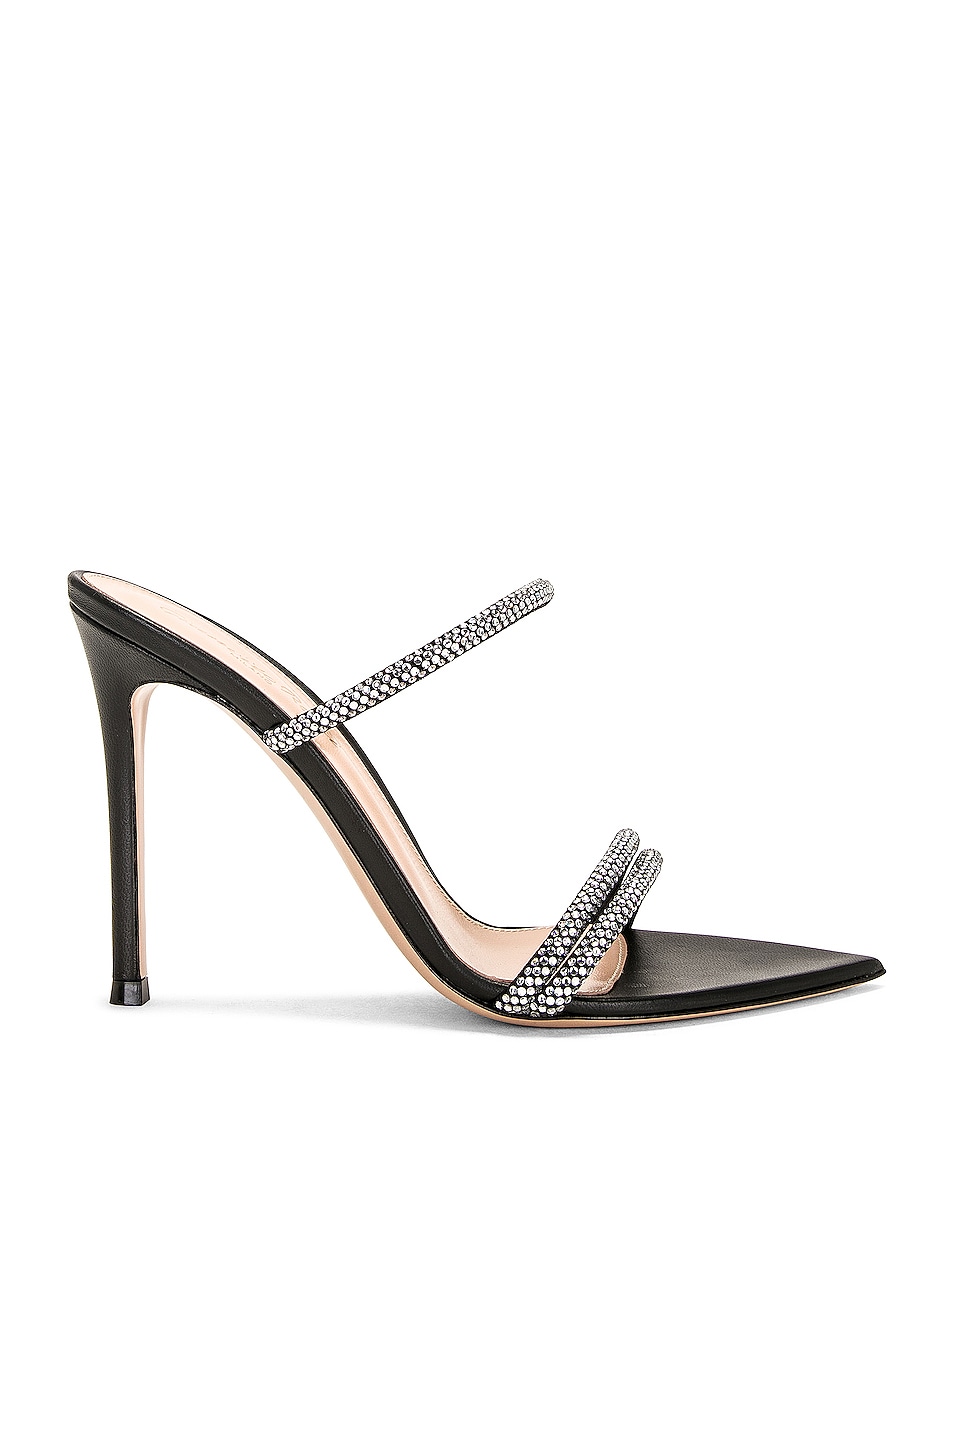 Image 1 of Gianvito Rossi Cannes Sandal in Black & Crystal